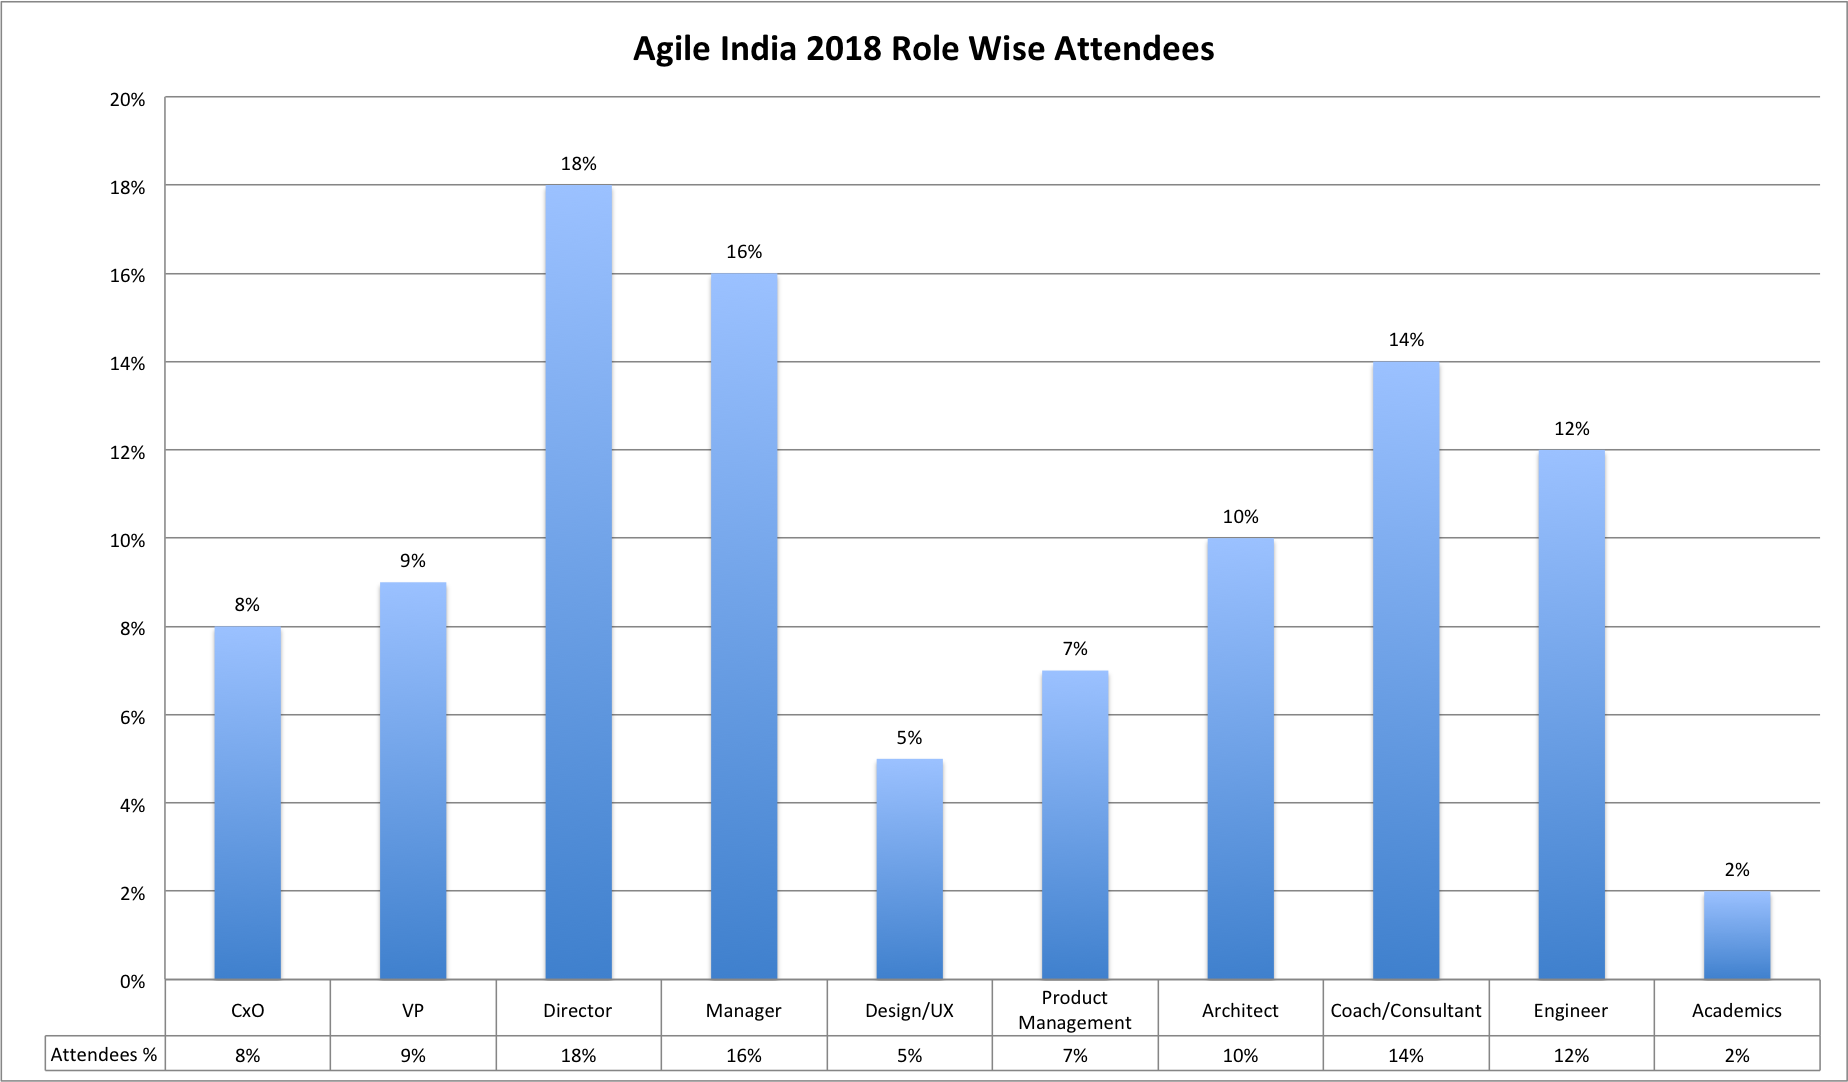 Agile India 2018 Role Wise Attendees